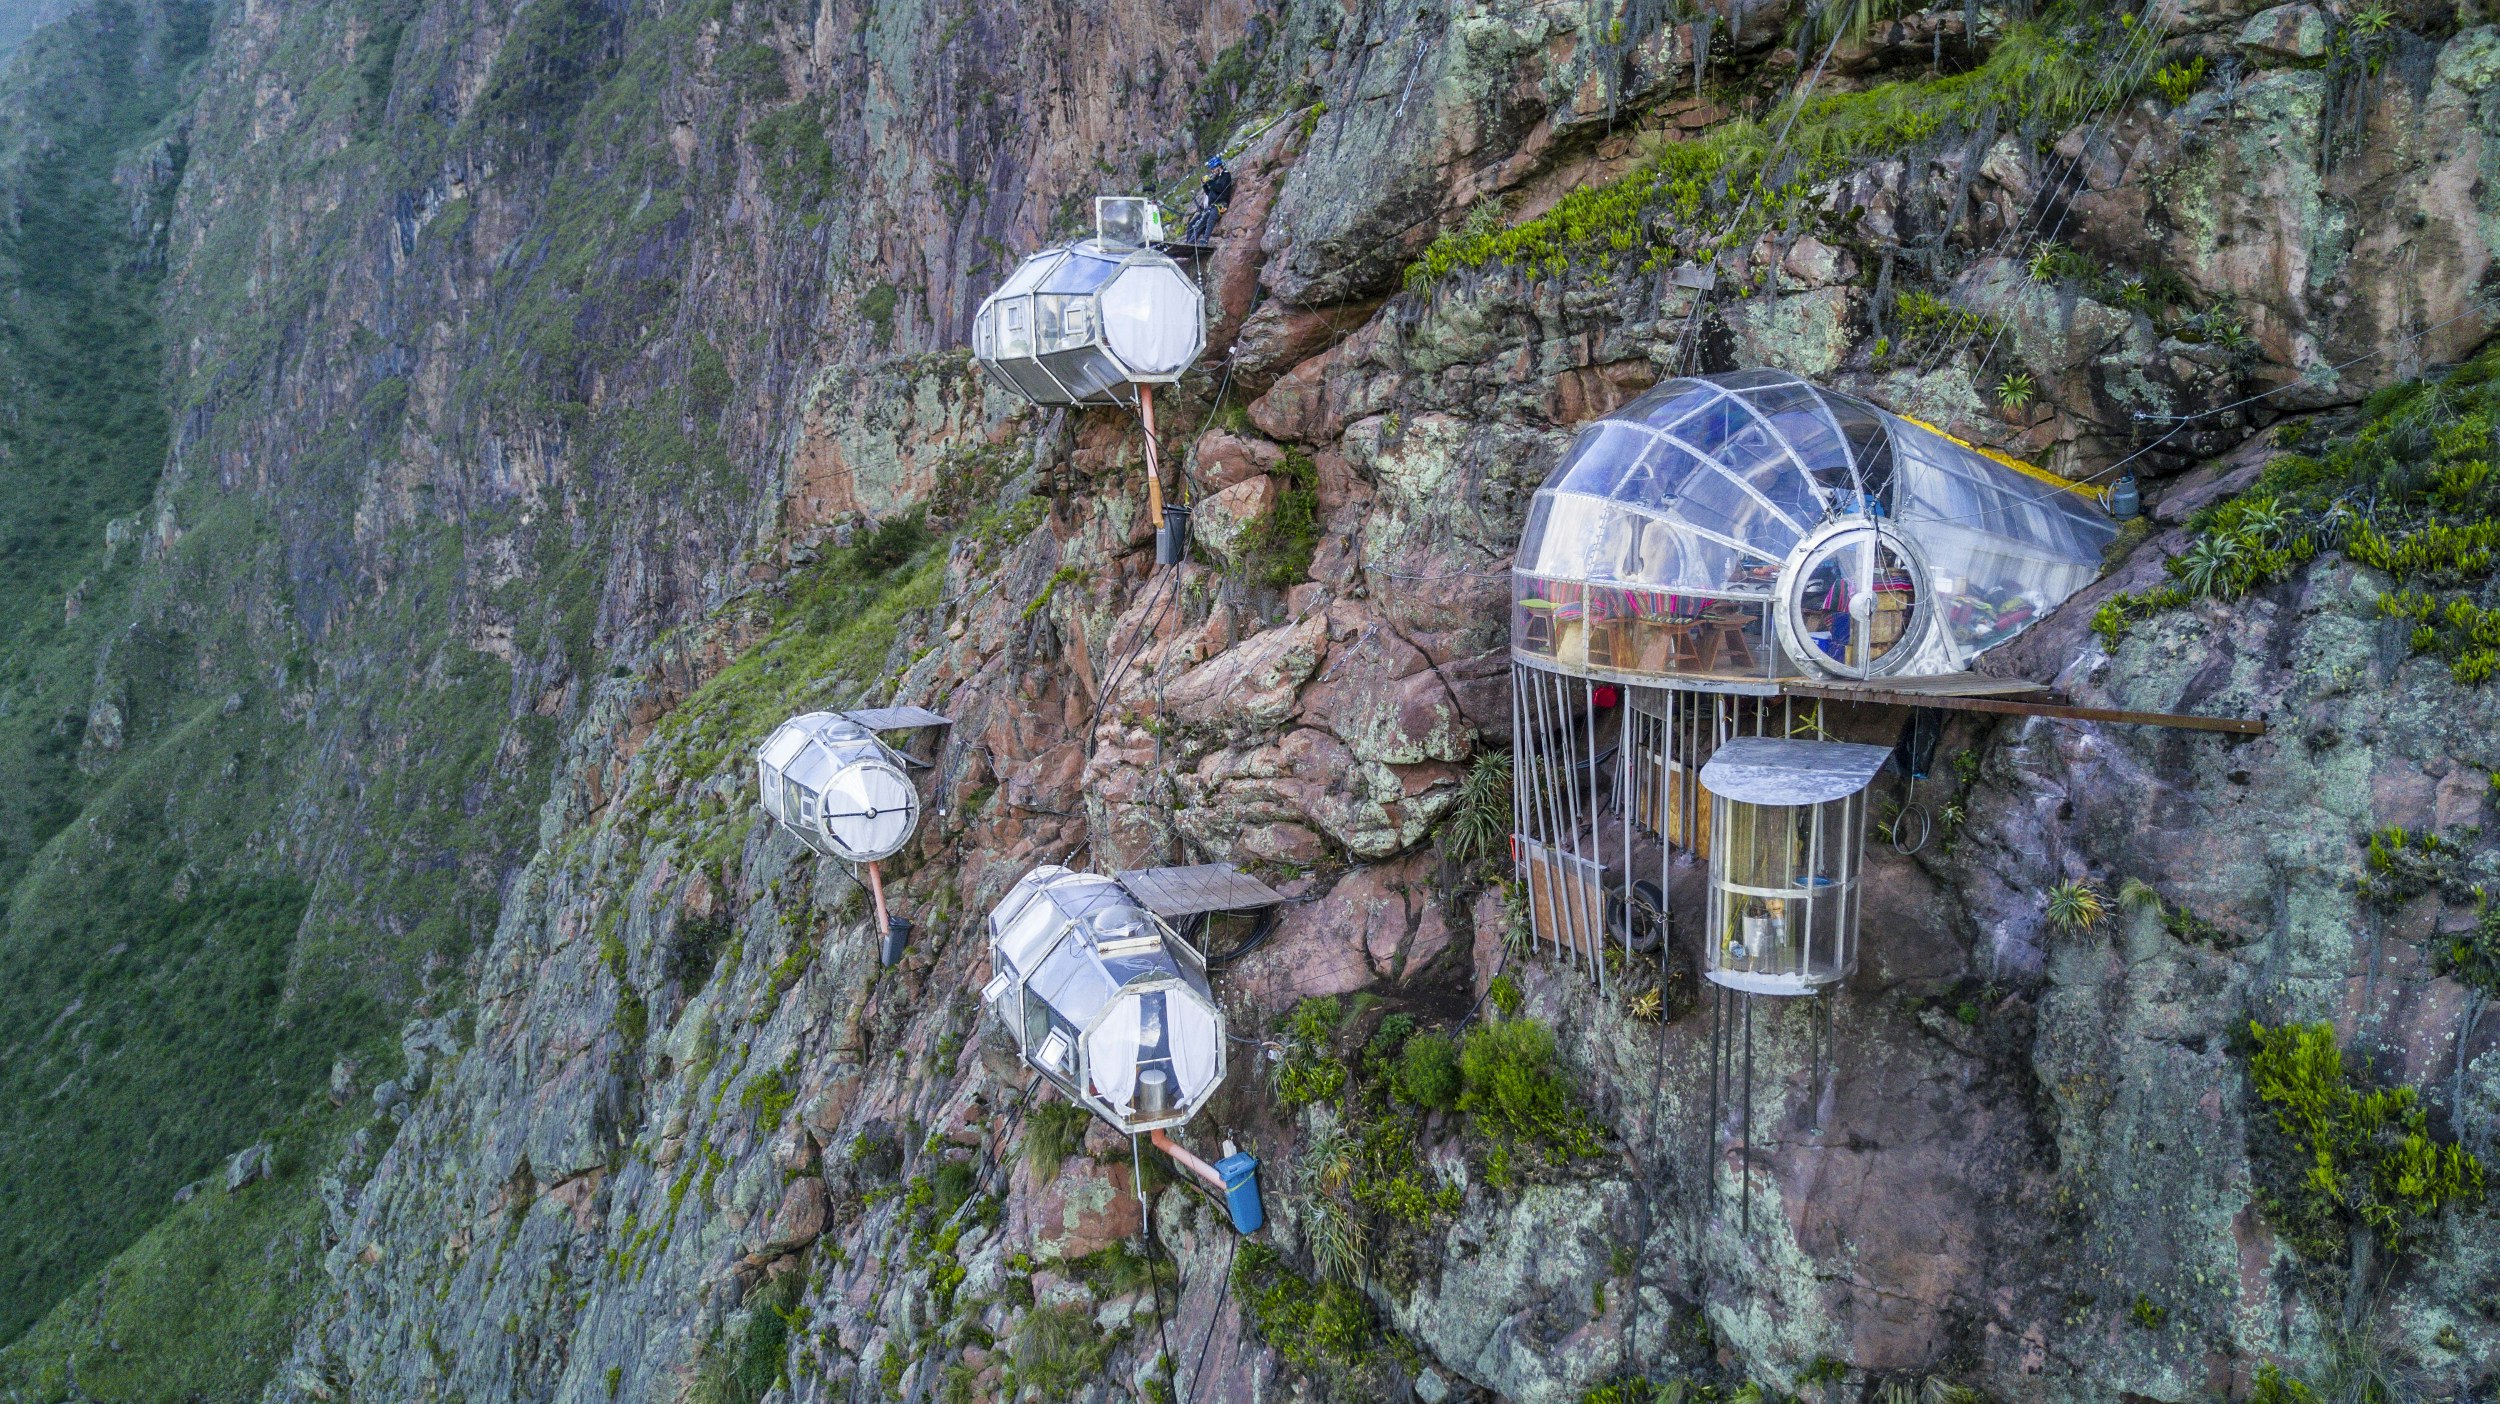 Each capsule has six windows and offers 300-degree views.